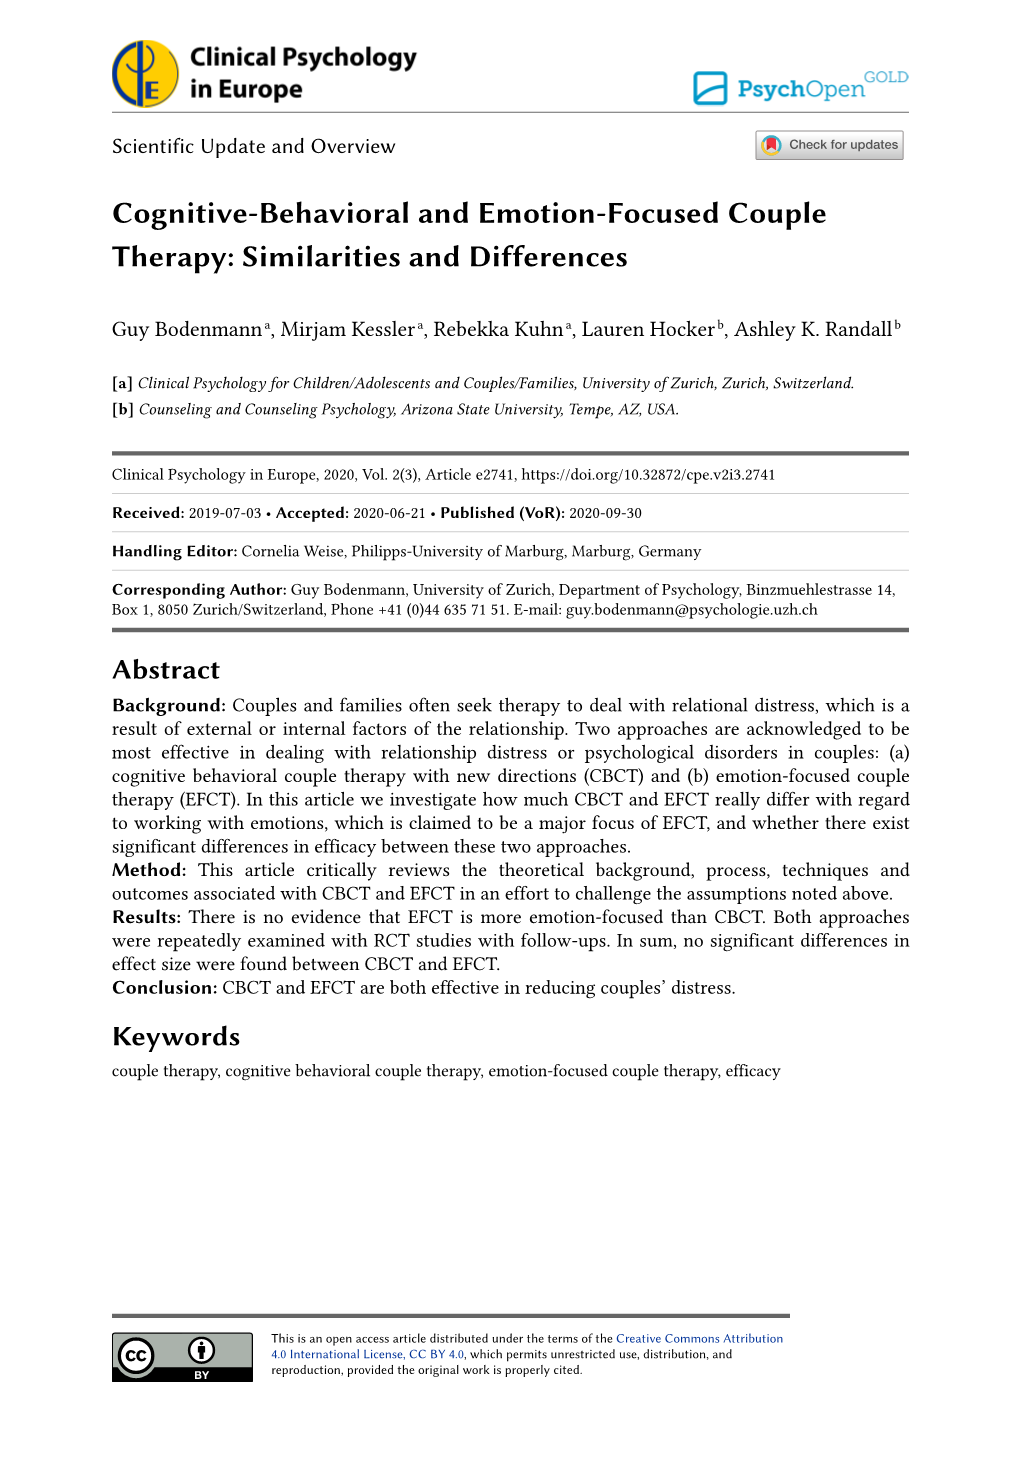 Cognitive-Behavioral and Emotion-Focused Couple Therapy: Similarities and Differences